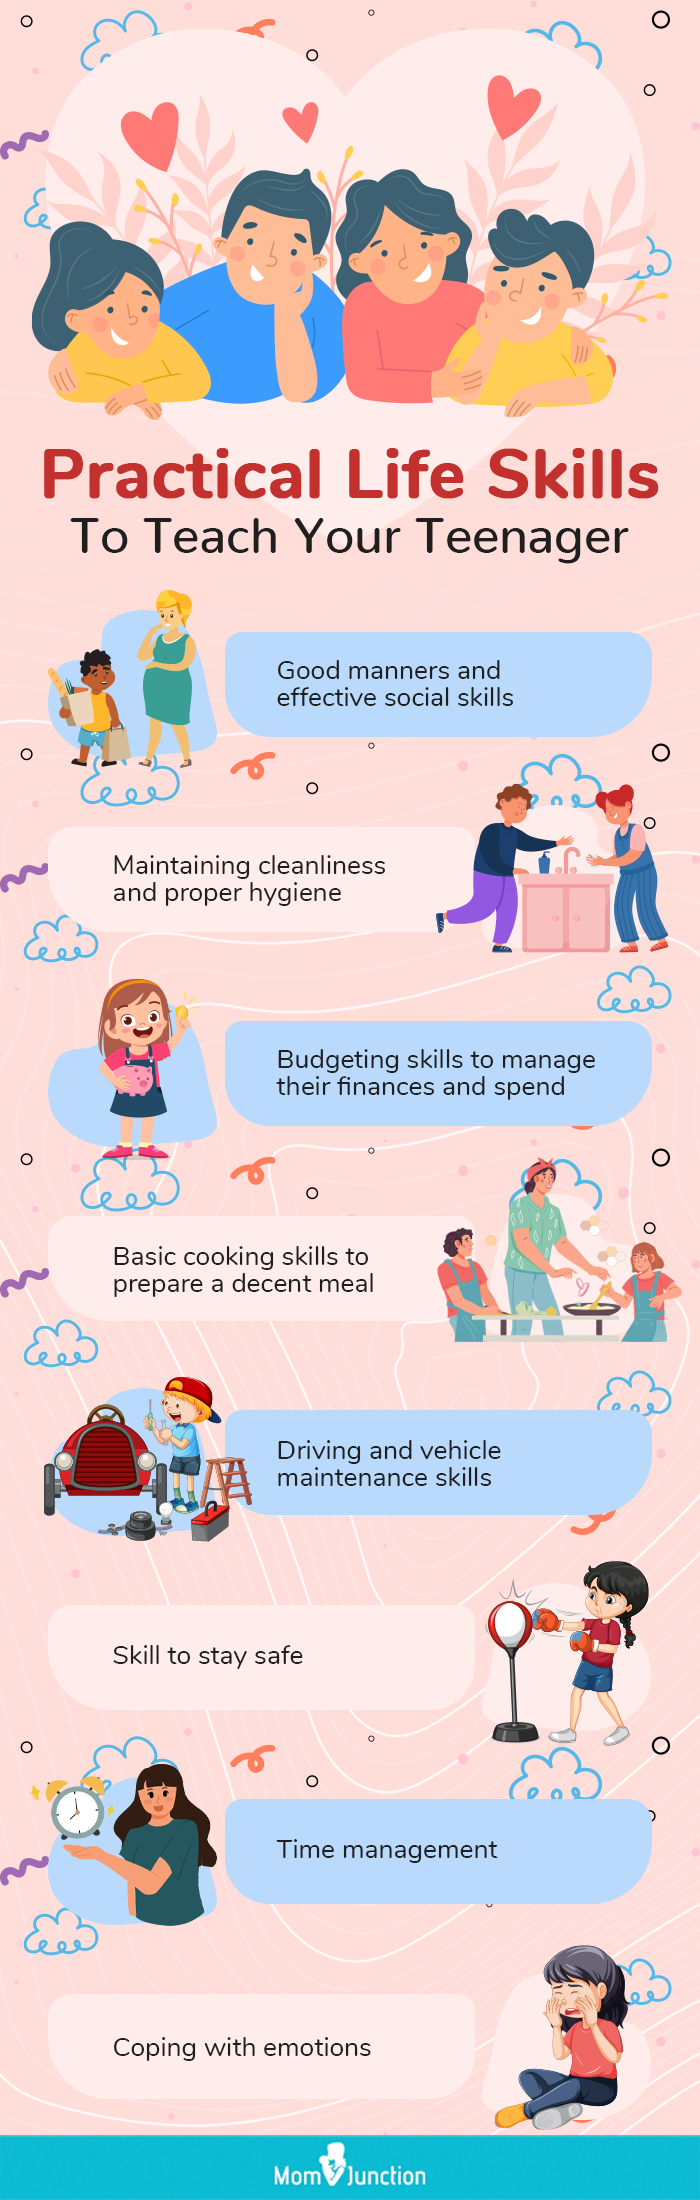 life skills to teach your teenager (infographic)